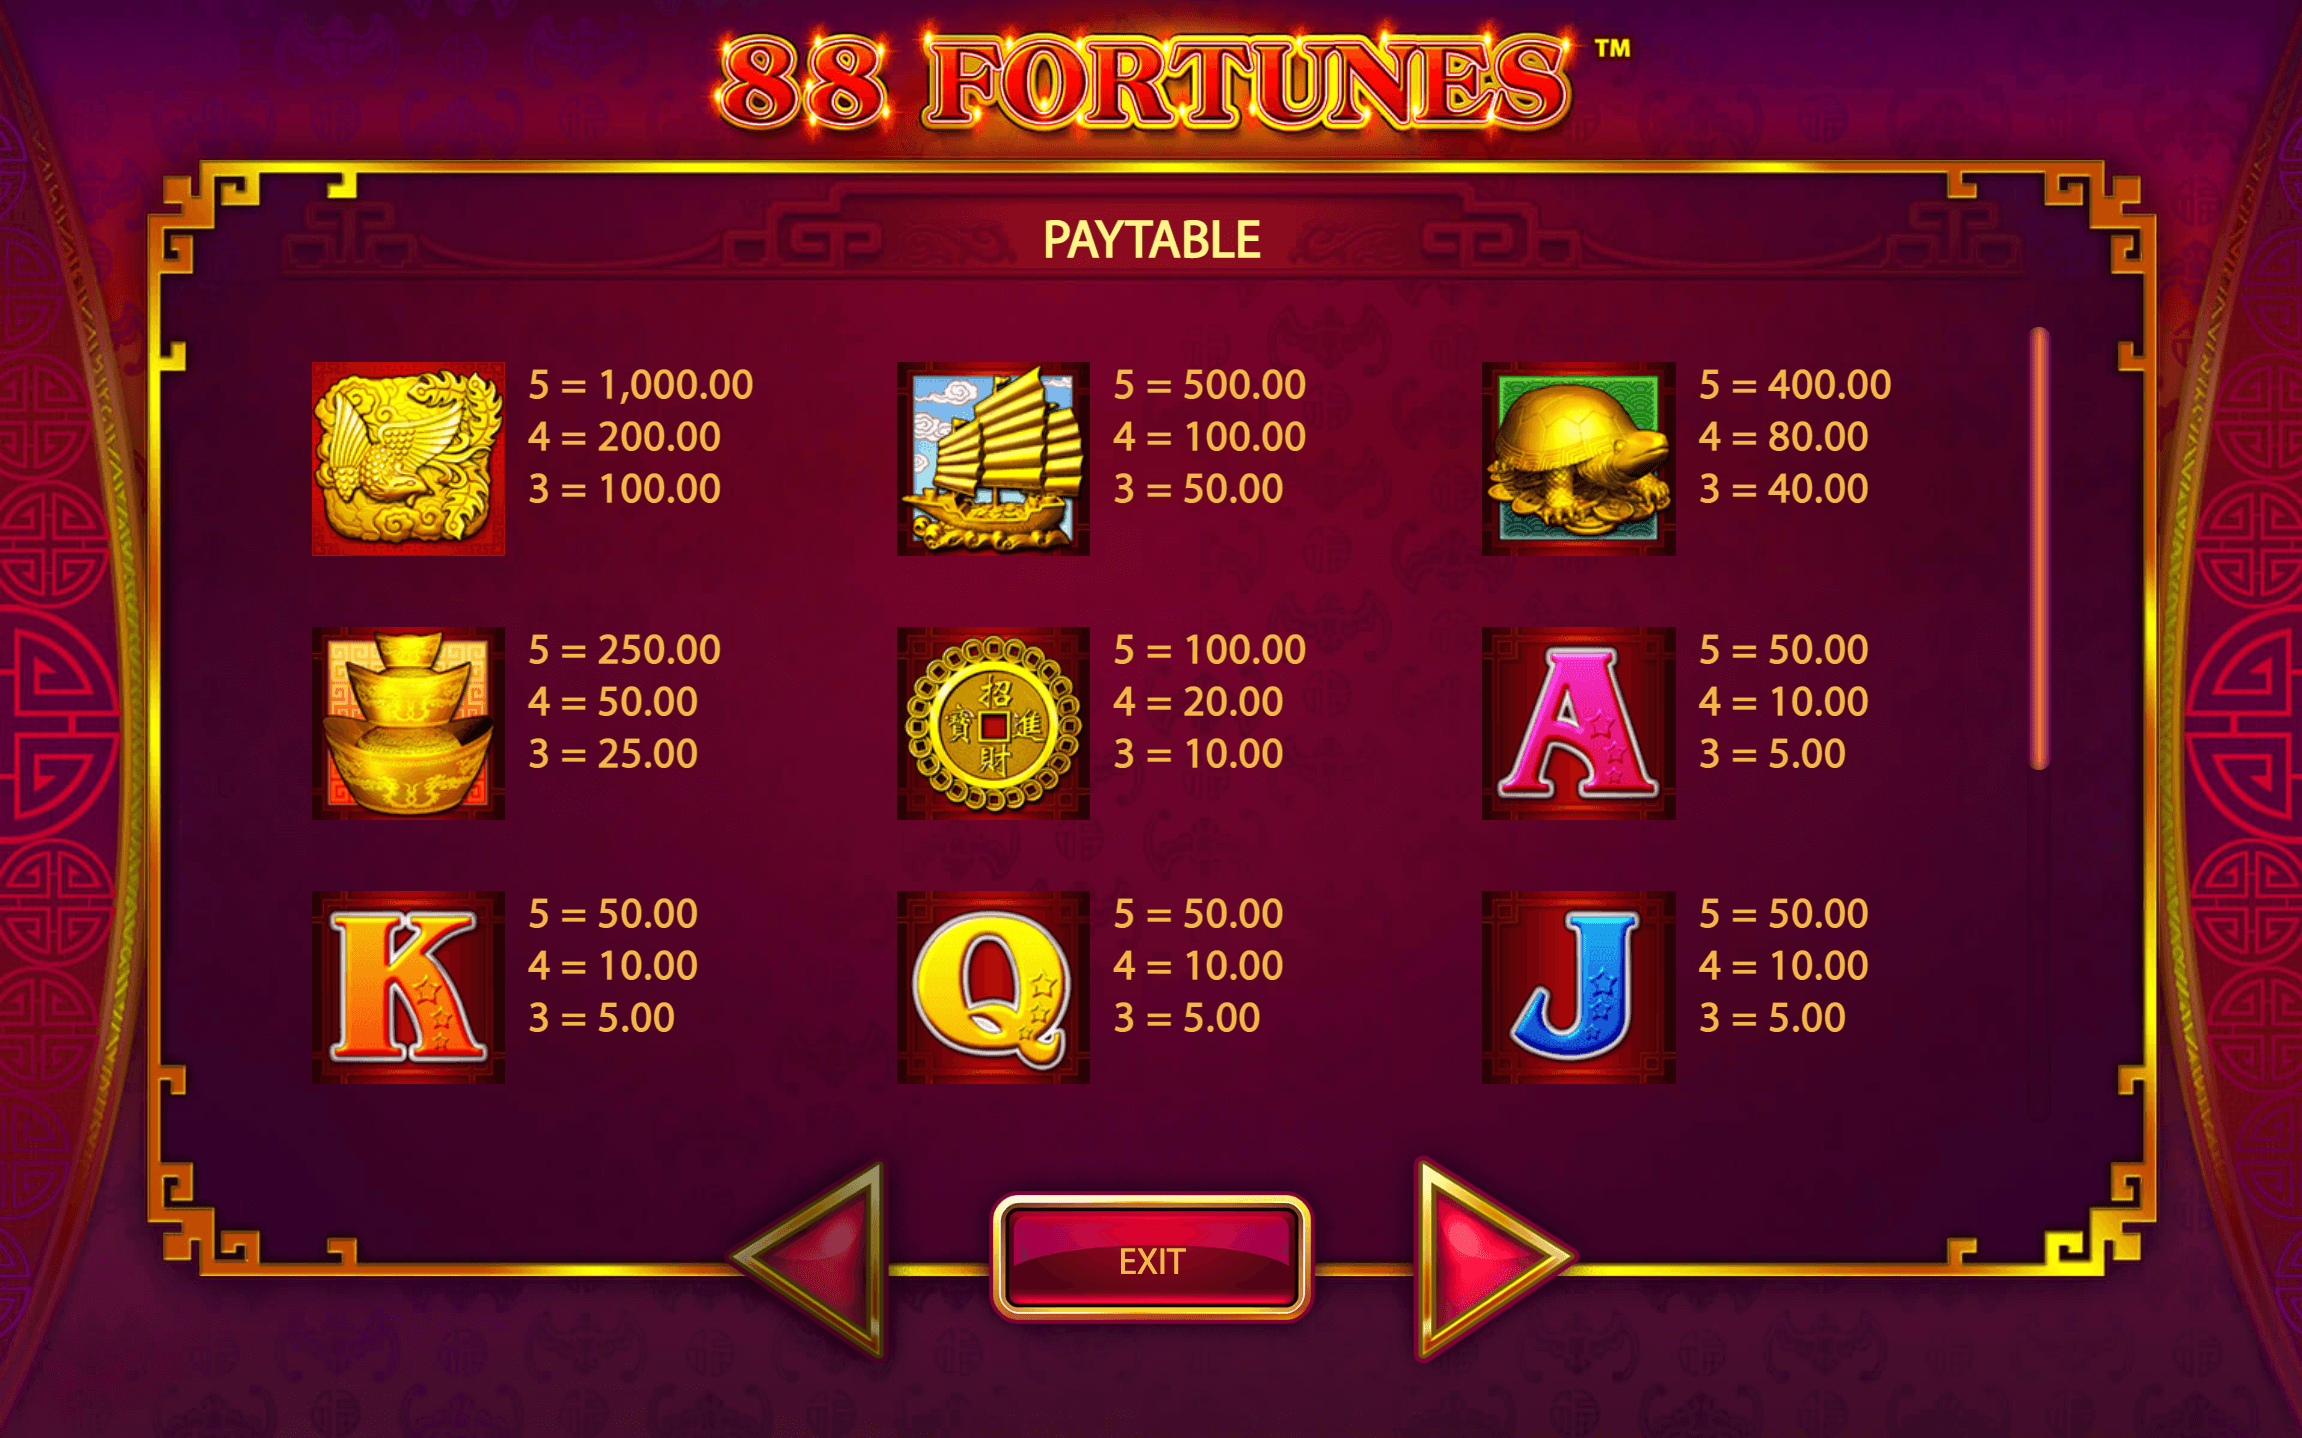 88 Fortunes Slot Paytable